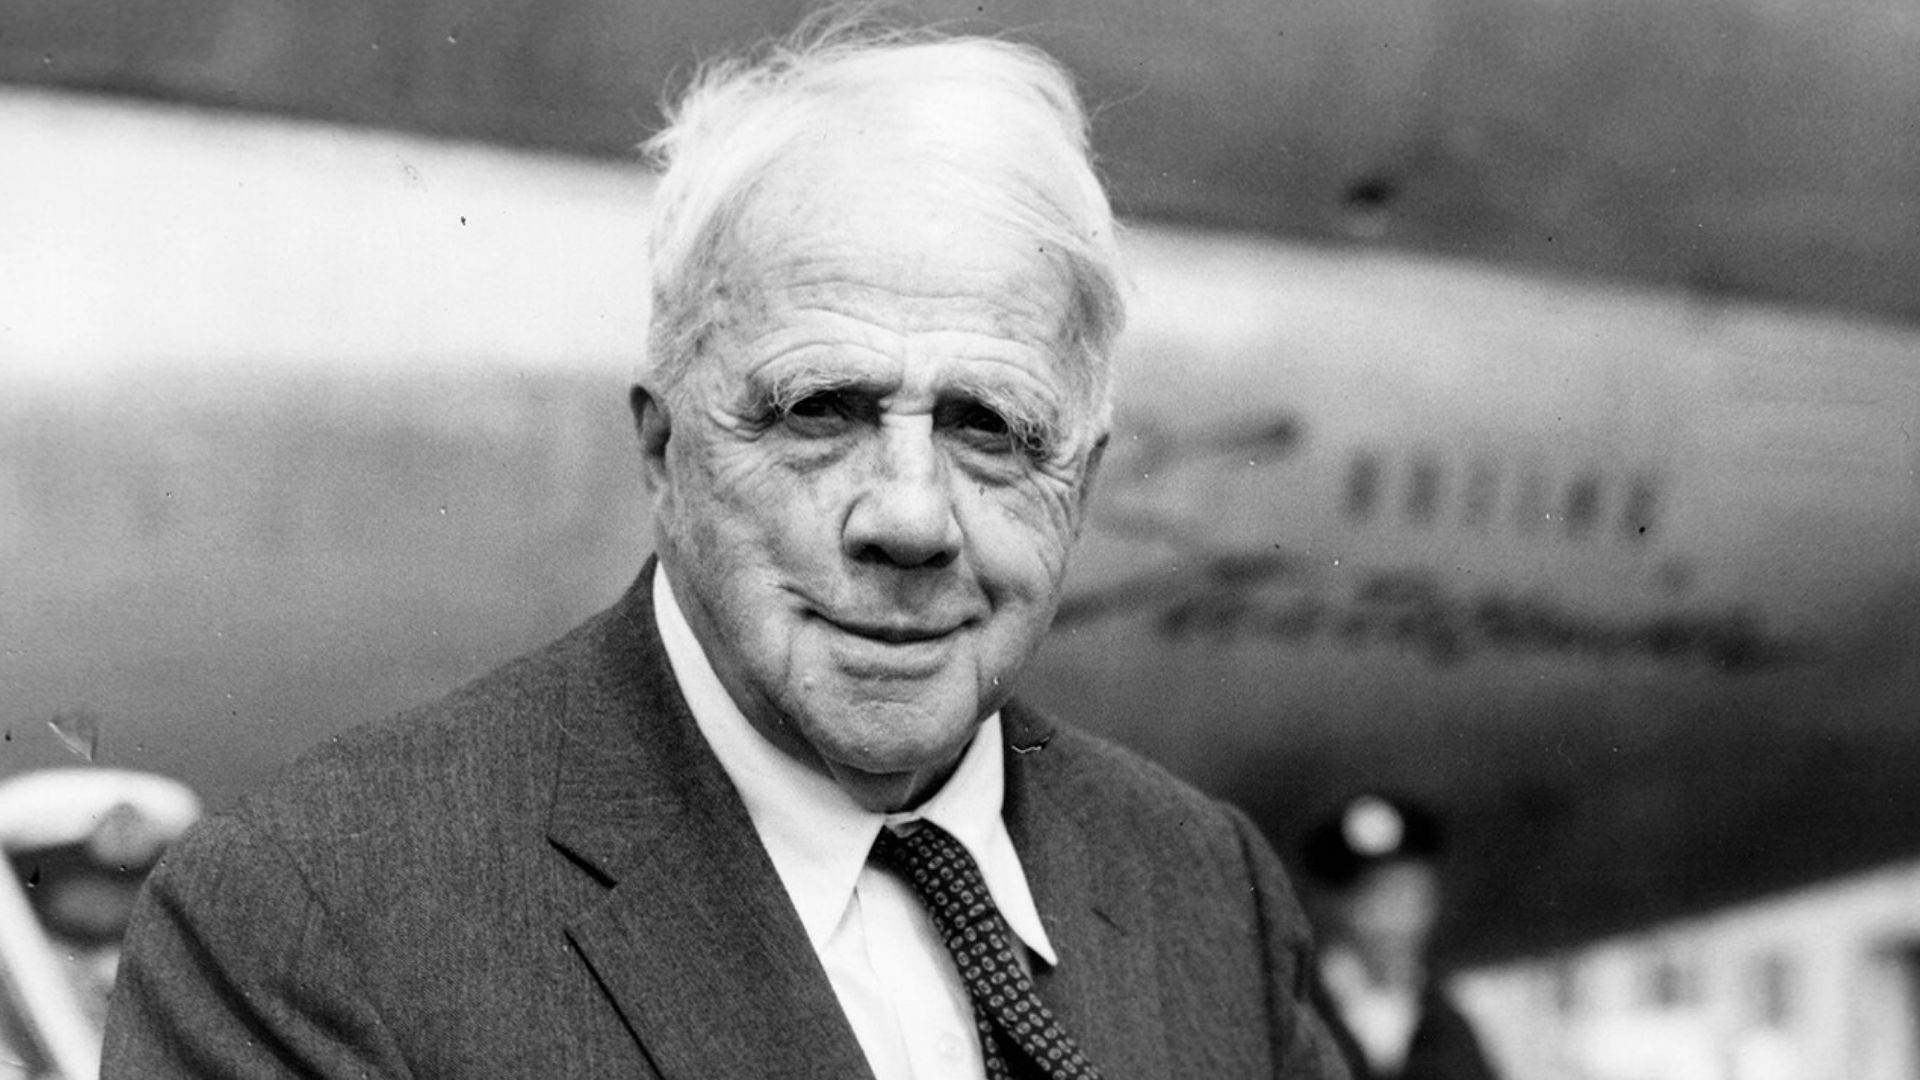 education by poetry robert frost